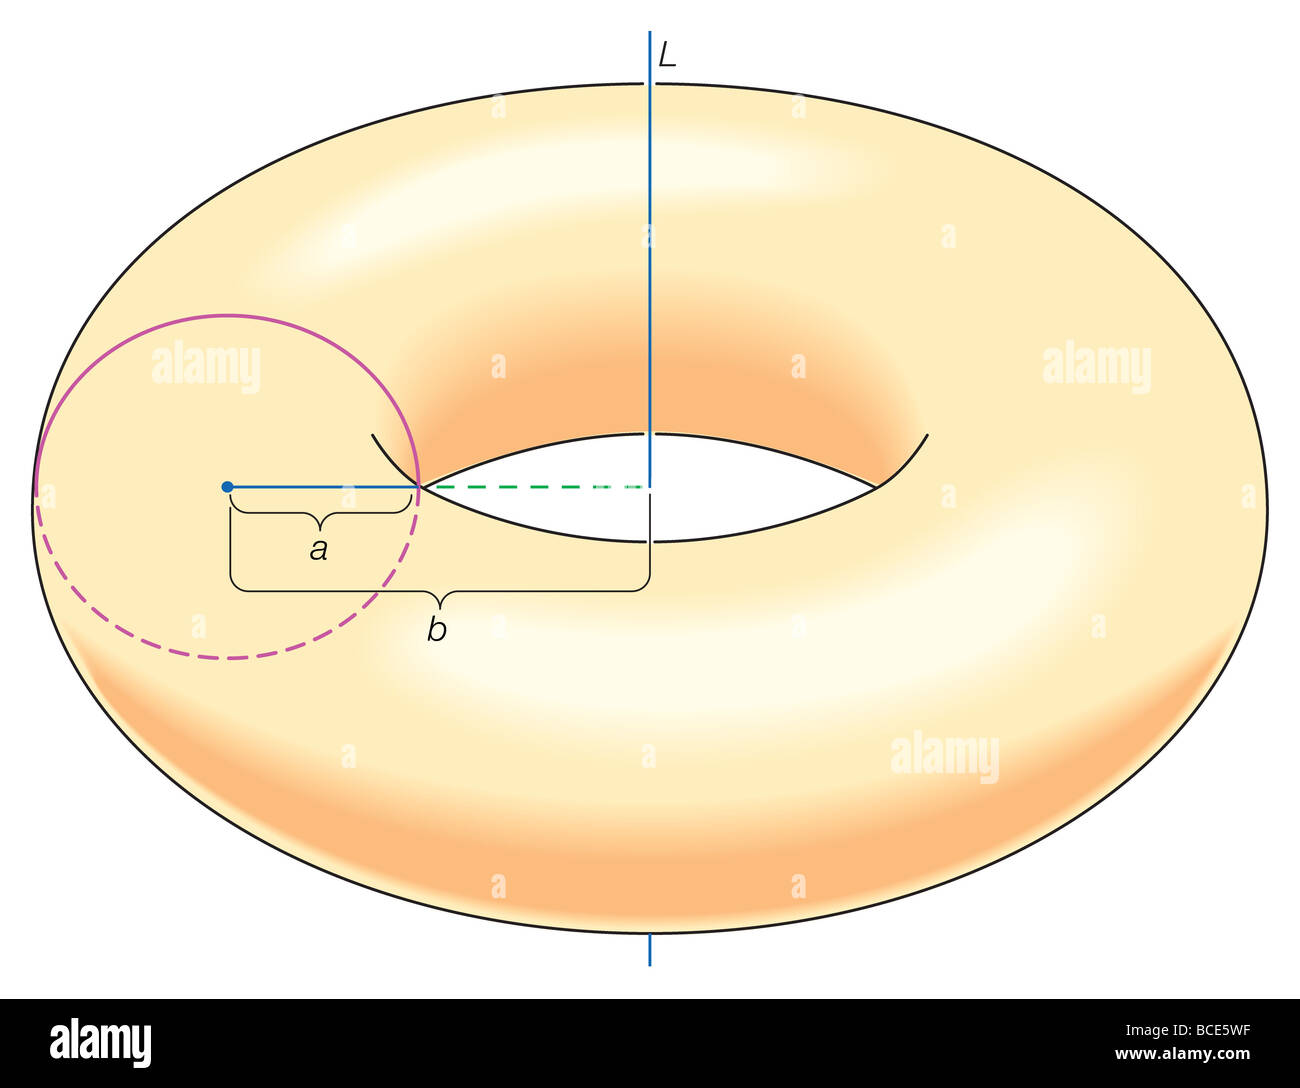 Pappus's theorem proved the formula for the volume of the solid torus obtained by rotating the disk of radius a around line L. Stock Photo